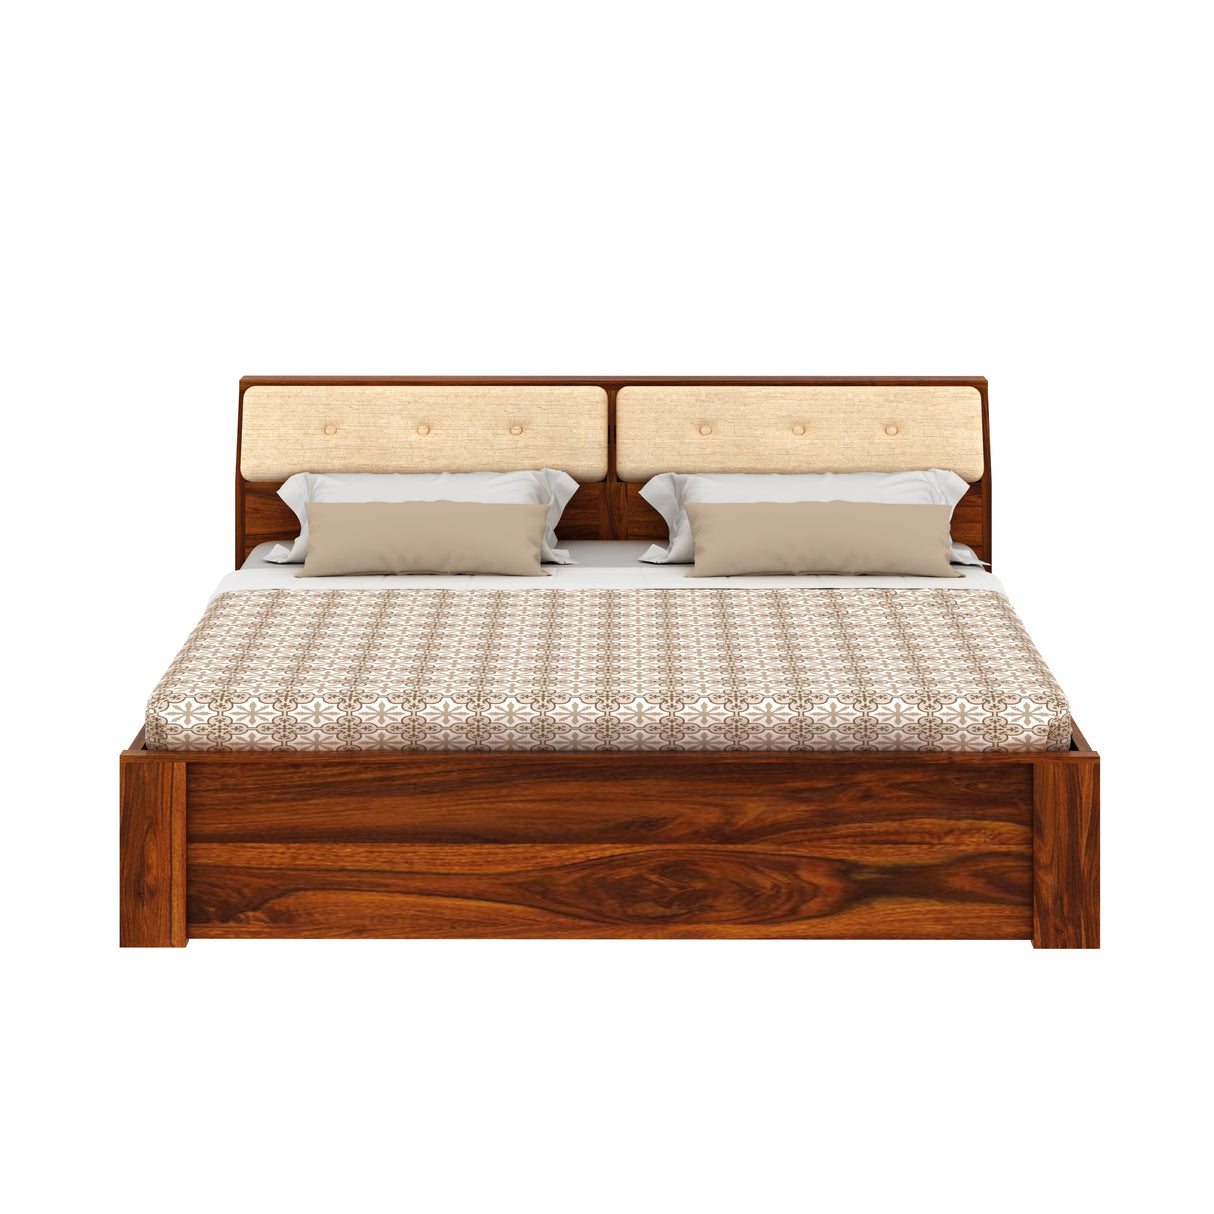 Victoria Solid Sheesham Wood Bed Without Storage - 1 Year Warranty